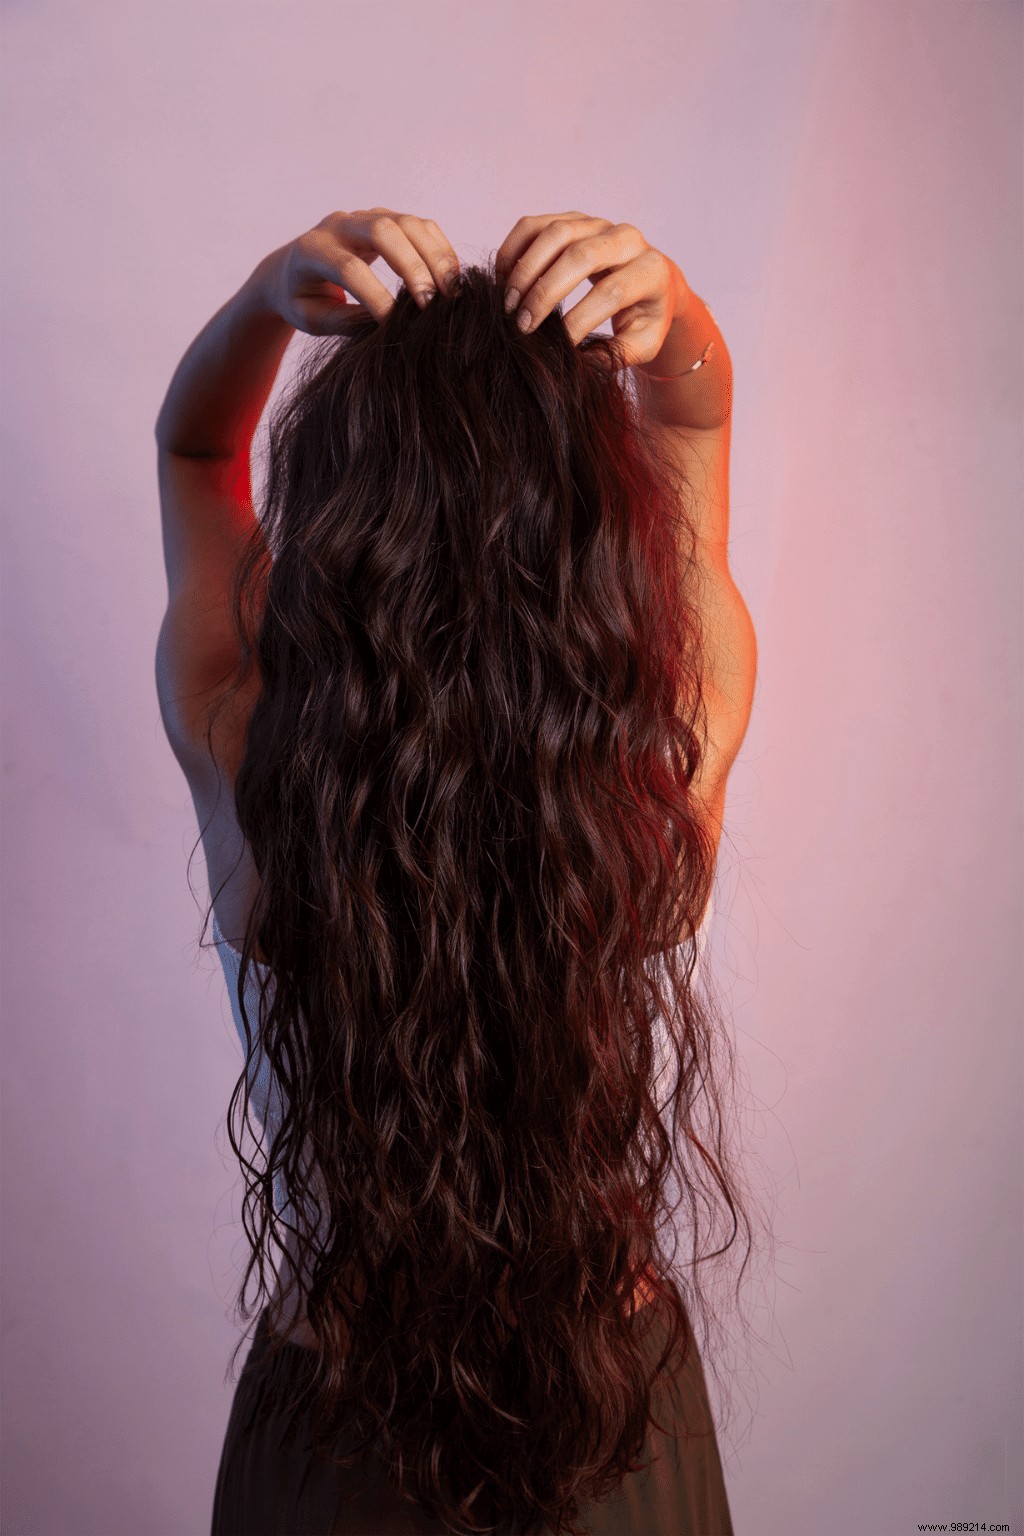 How to take care of damaged, dry or normal hair naturally? 